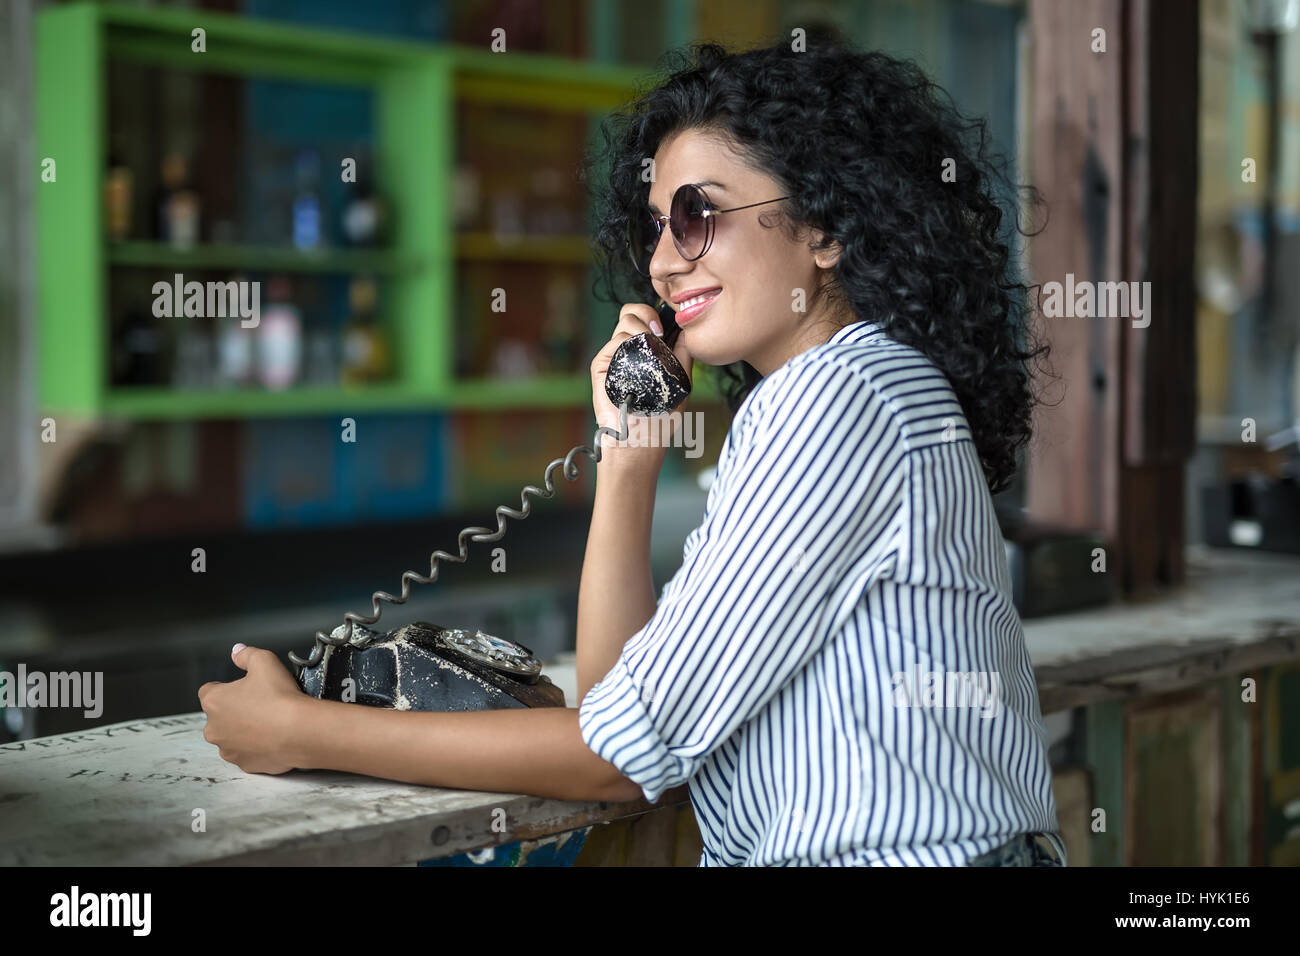 Girl is talking on phone Stock Photo